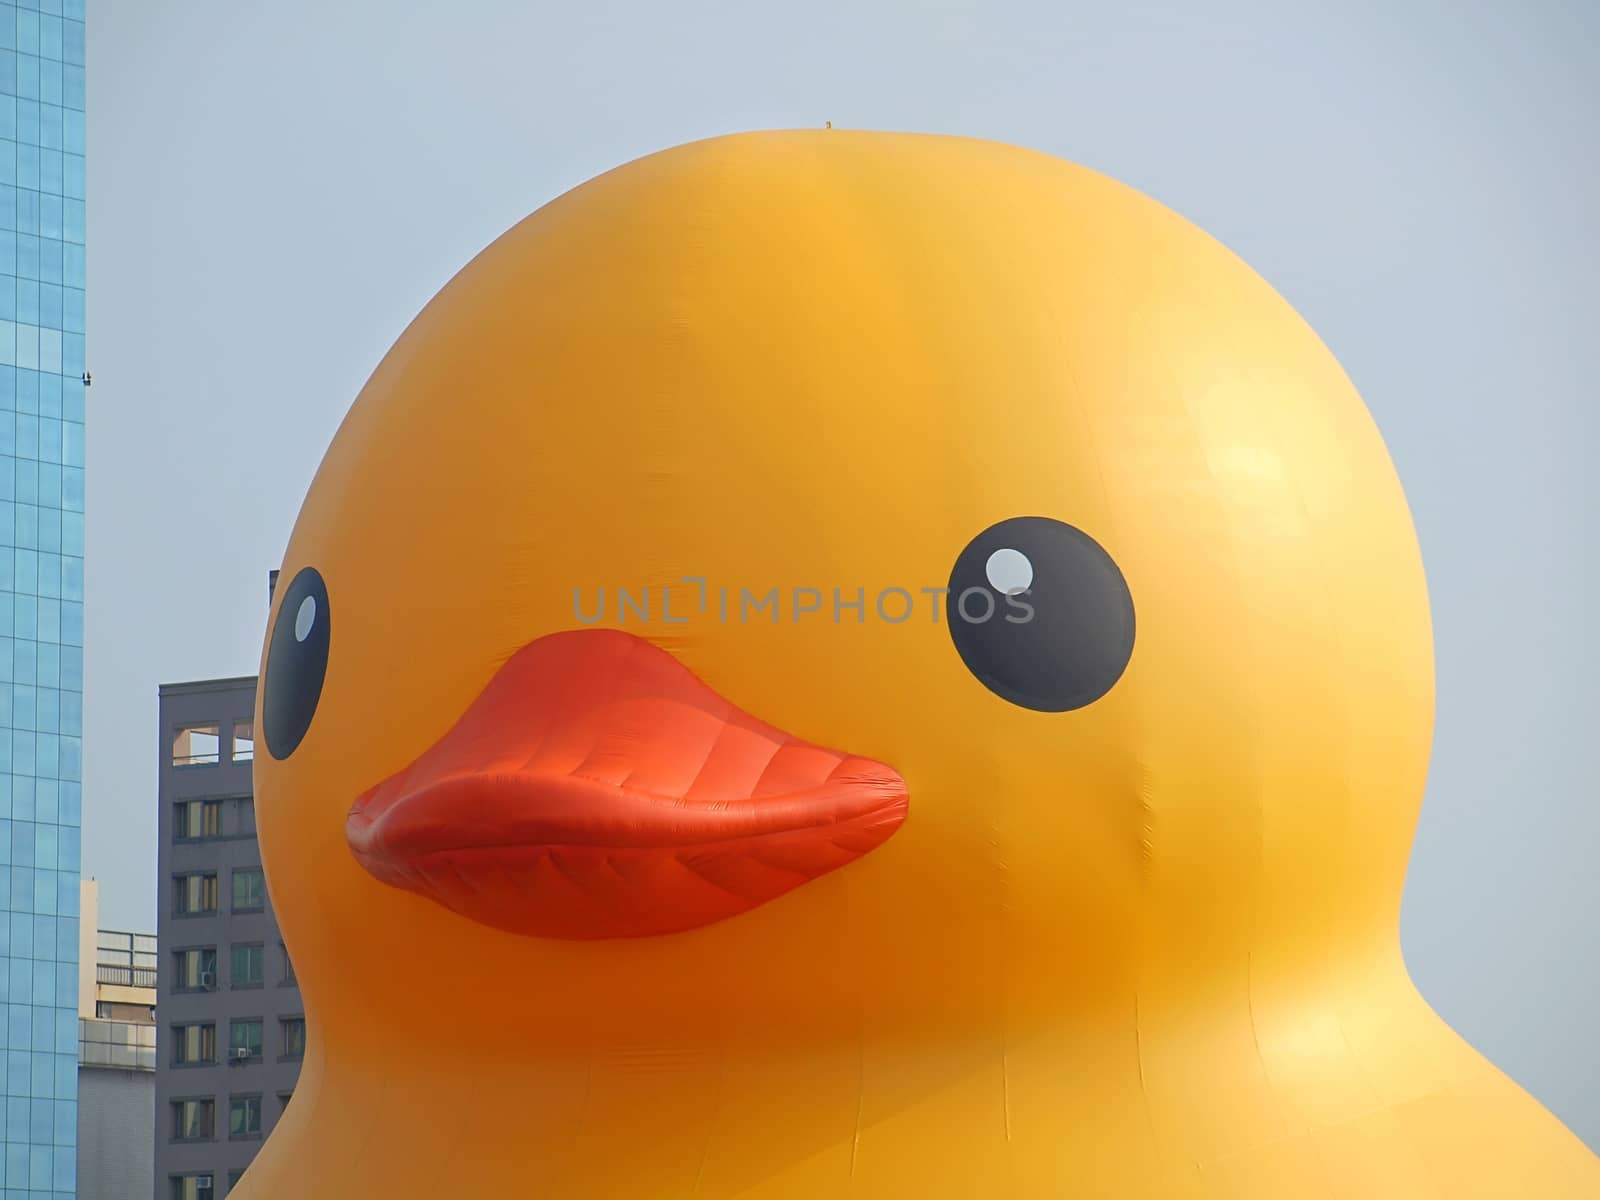 Giant Rubber Duck Visits Taiwan by shiyali